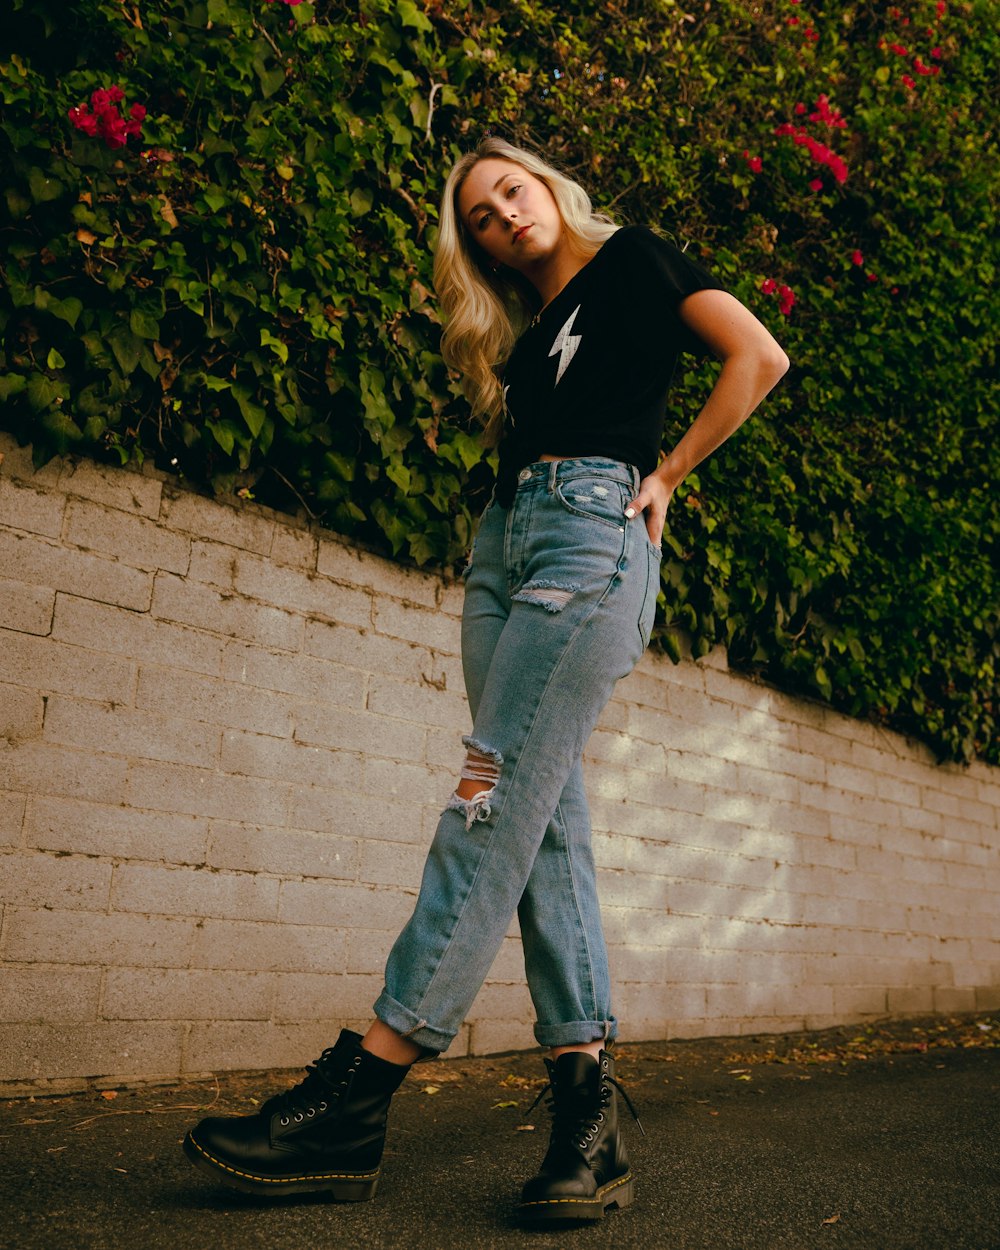 Woman in black t-shirt and blue denim jeans standing beside green plant  during daytime photo – Free Clothing Image on Unsplash